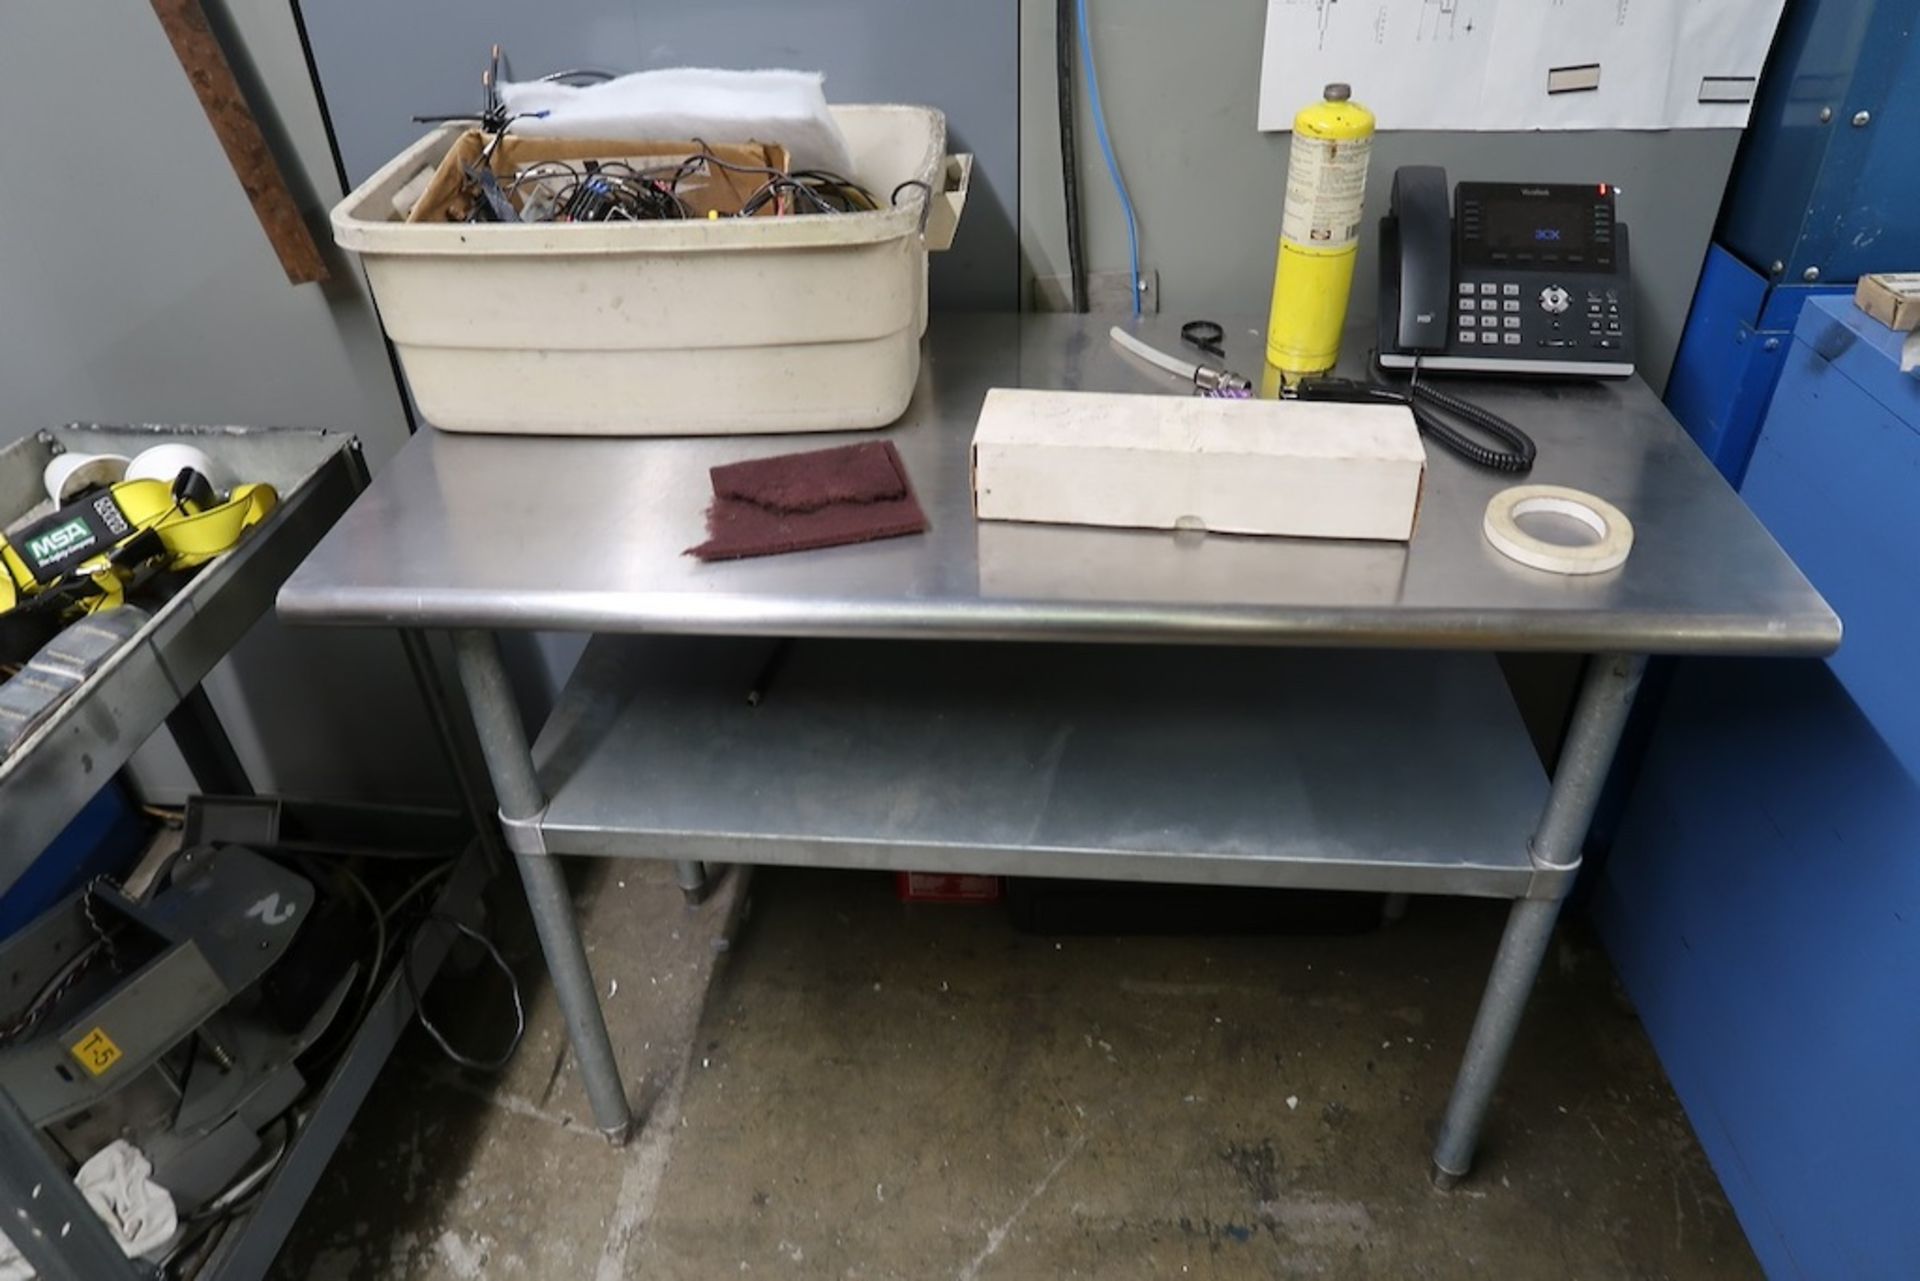 Workbench, Table, 2-Door Cabinets, Parts Organizers and Carts with Misc. Contents - Image 8 of 11